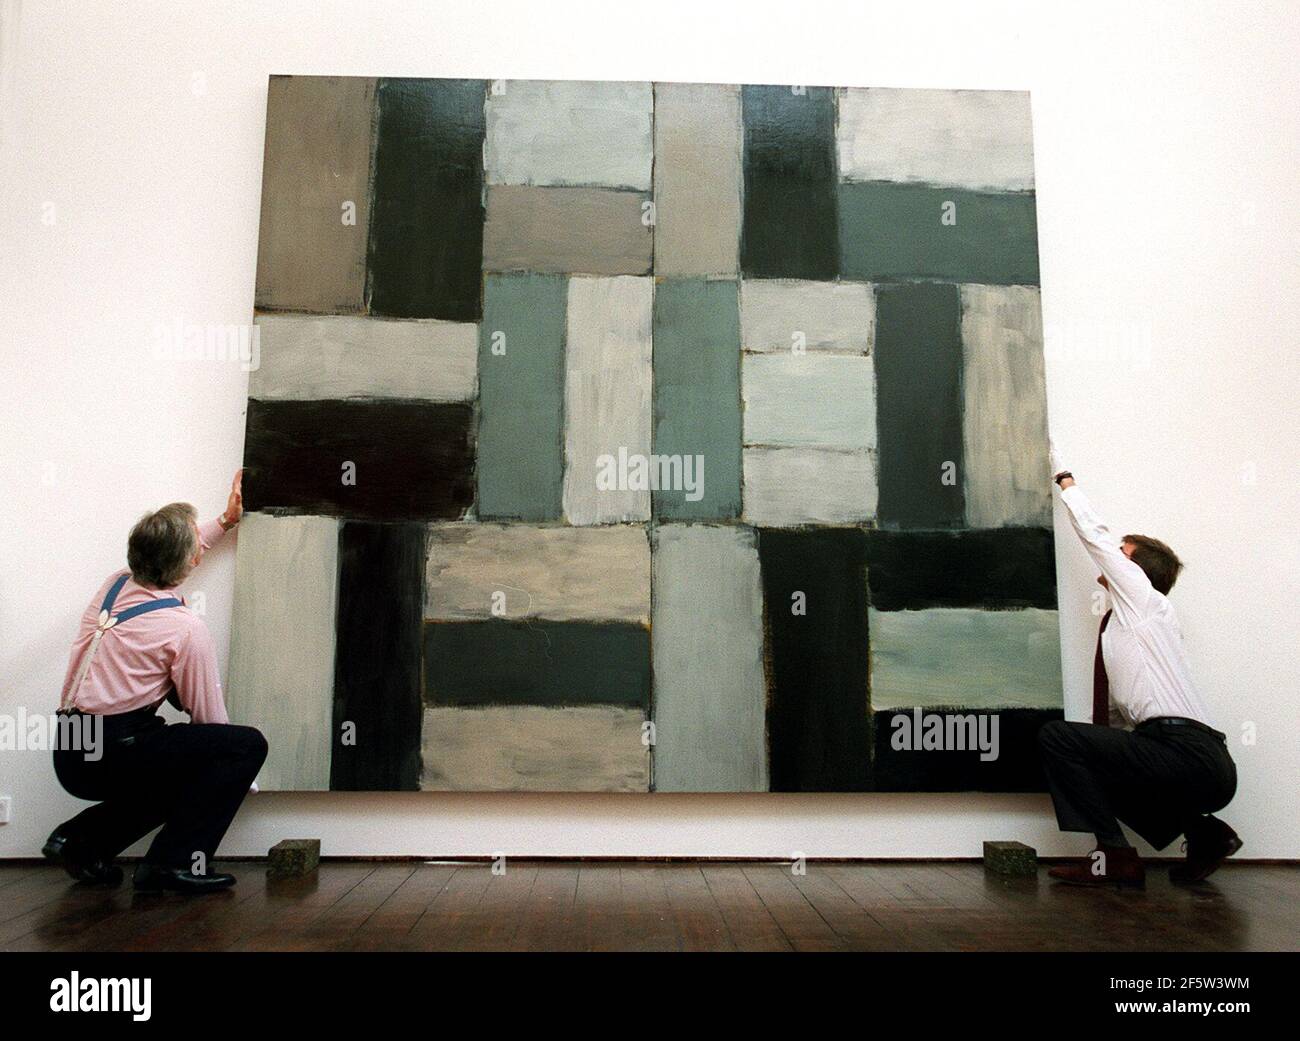 THE WORK OF SEAN SCULLY ENTITLED 'COYOTE' BEING HUNG AT THE TIMOTHY TAYLOR GALLERY IN BRUTON PLACE, W1.7 September 2000 PHOTO ANDY PARADISE Stock Photo